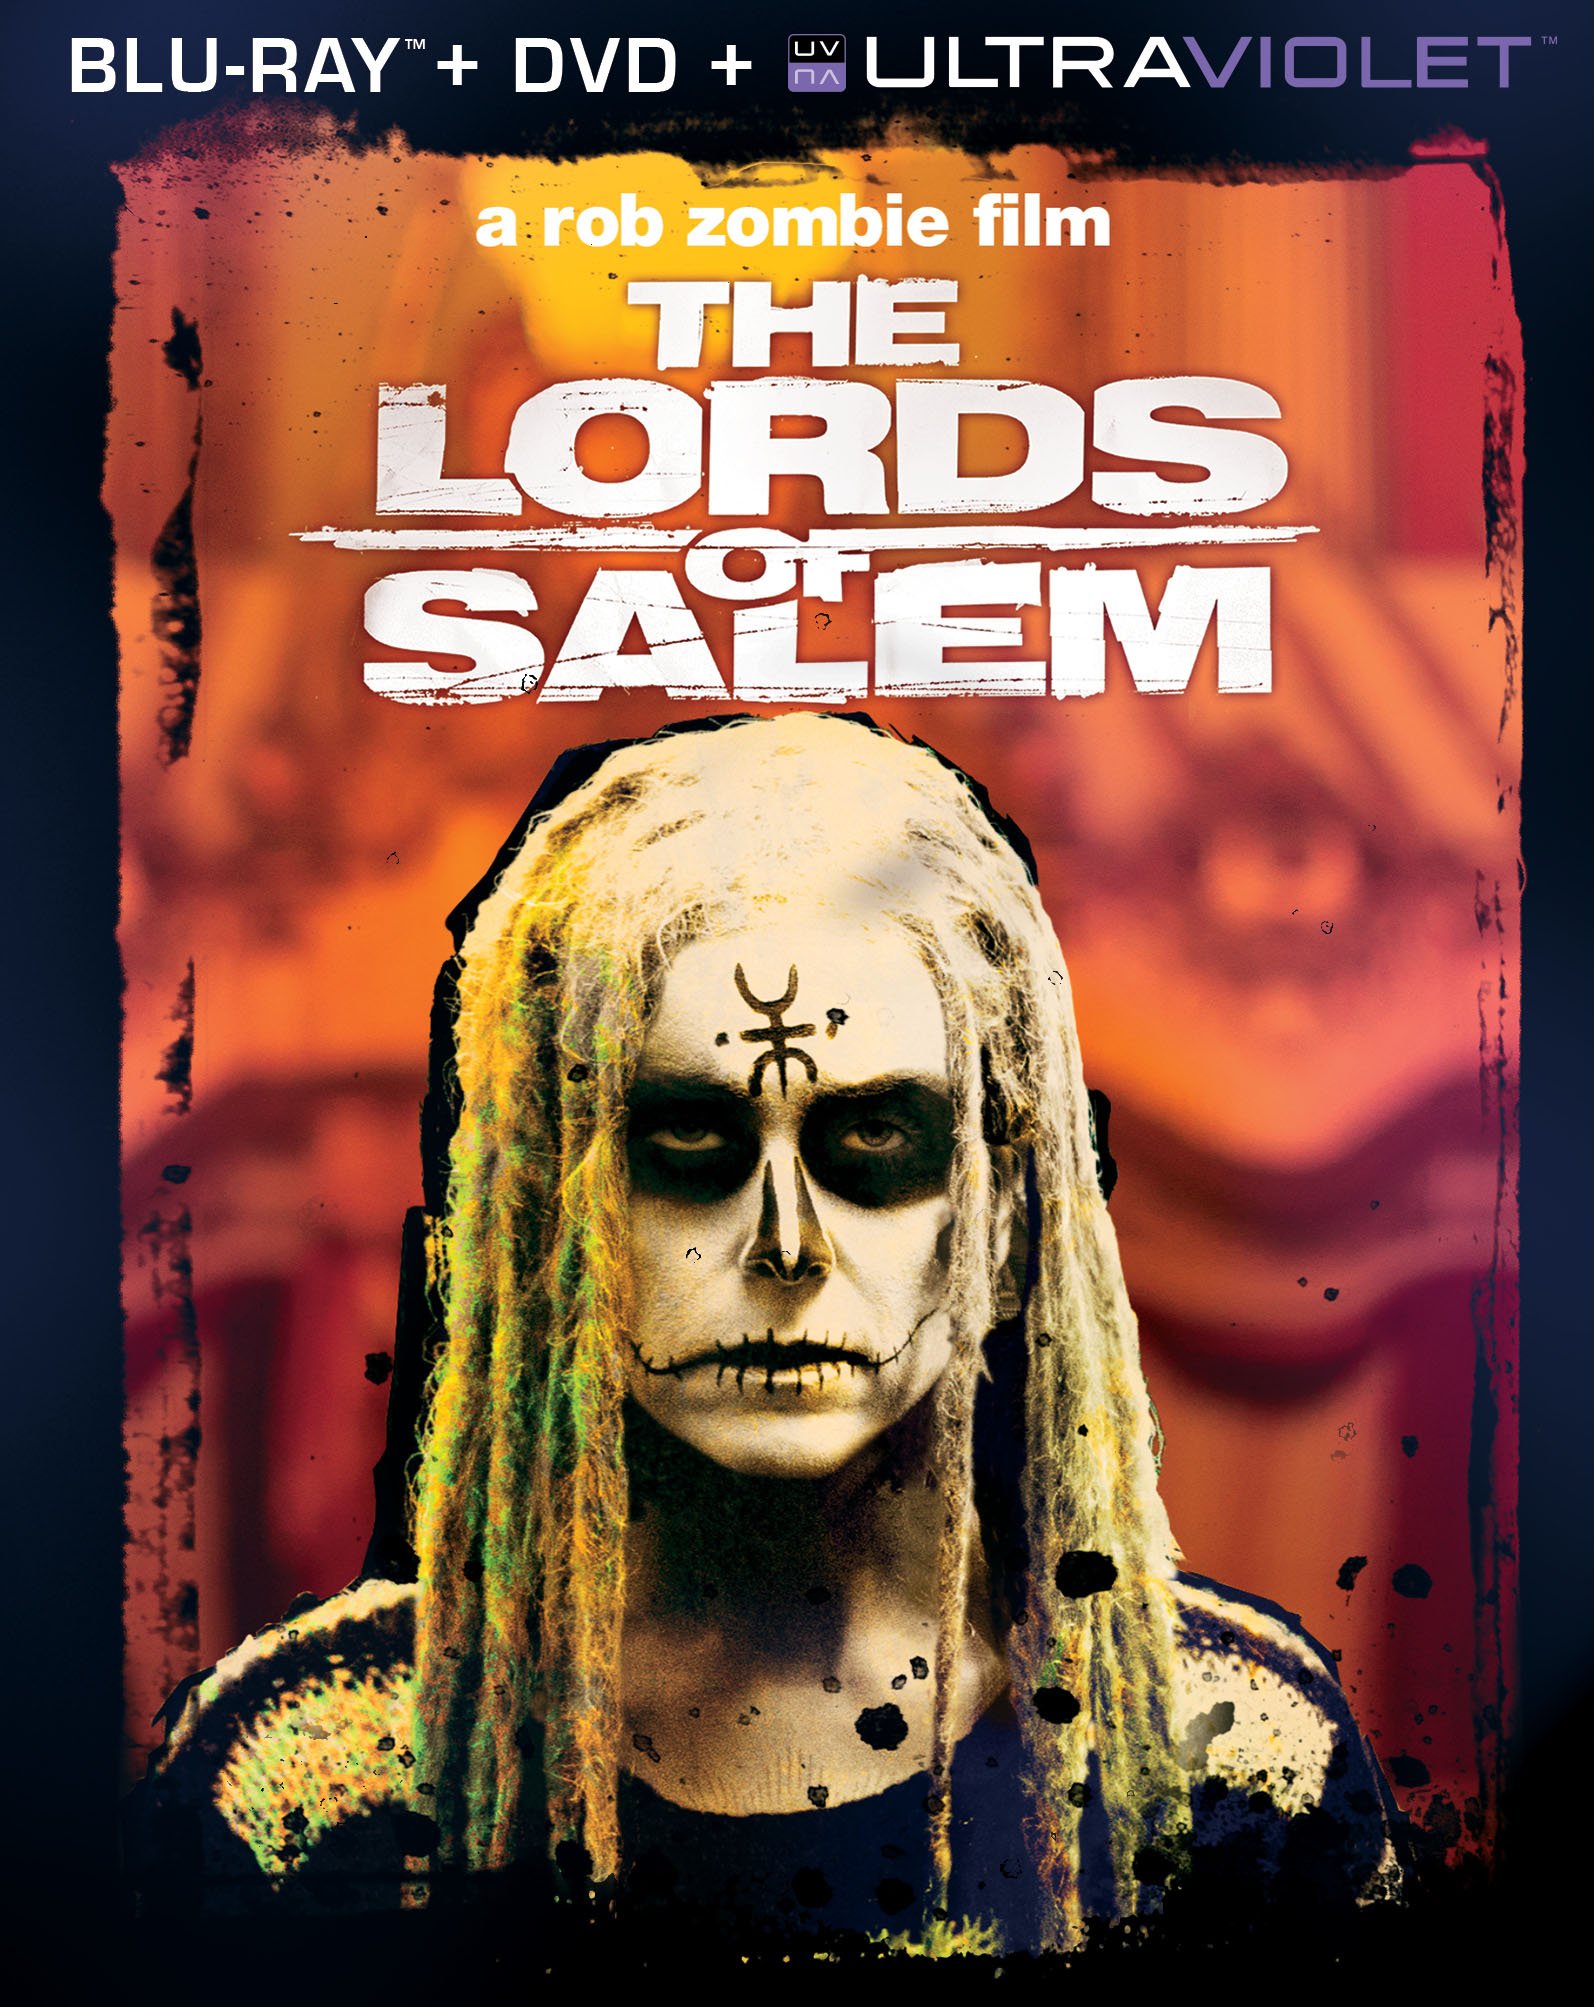 The Lords of Salem DVD Release Date September 3, 2013